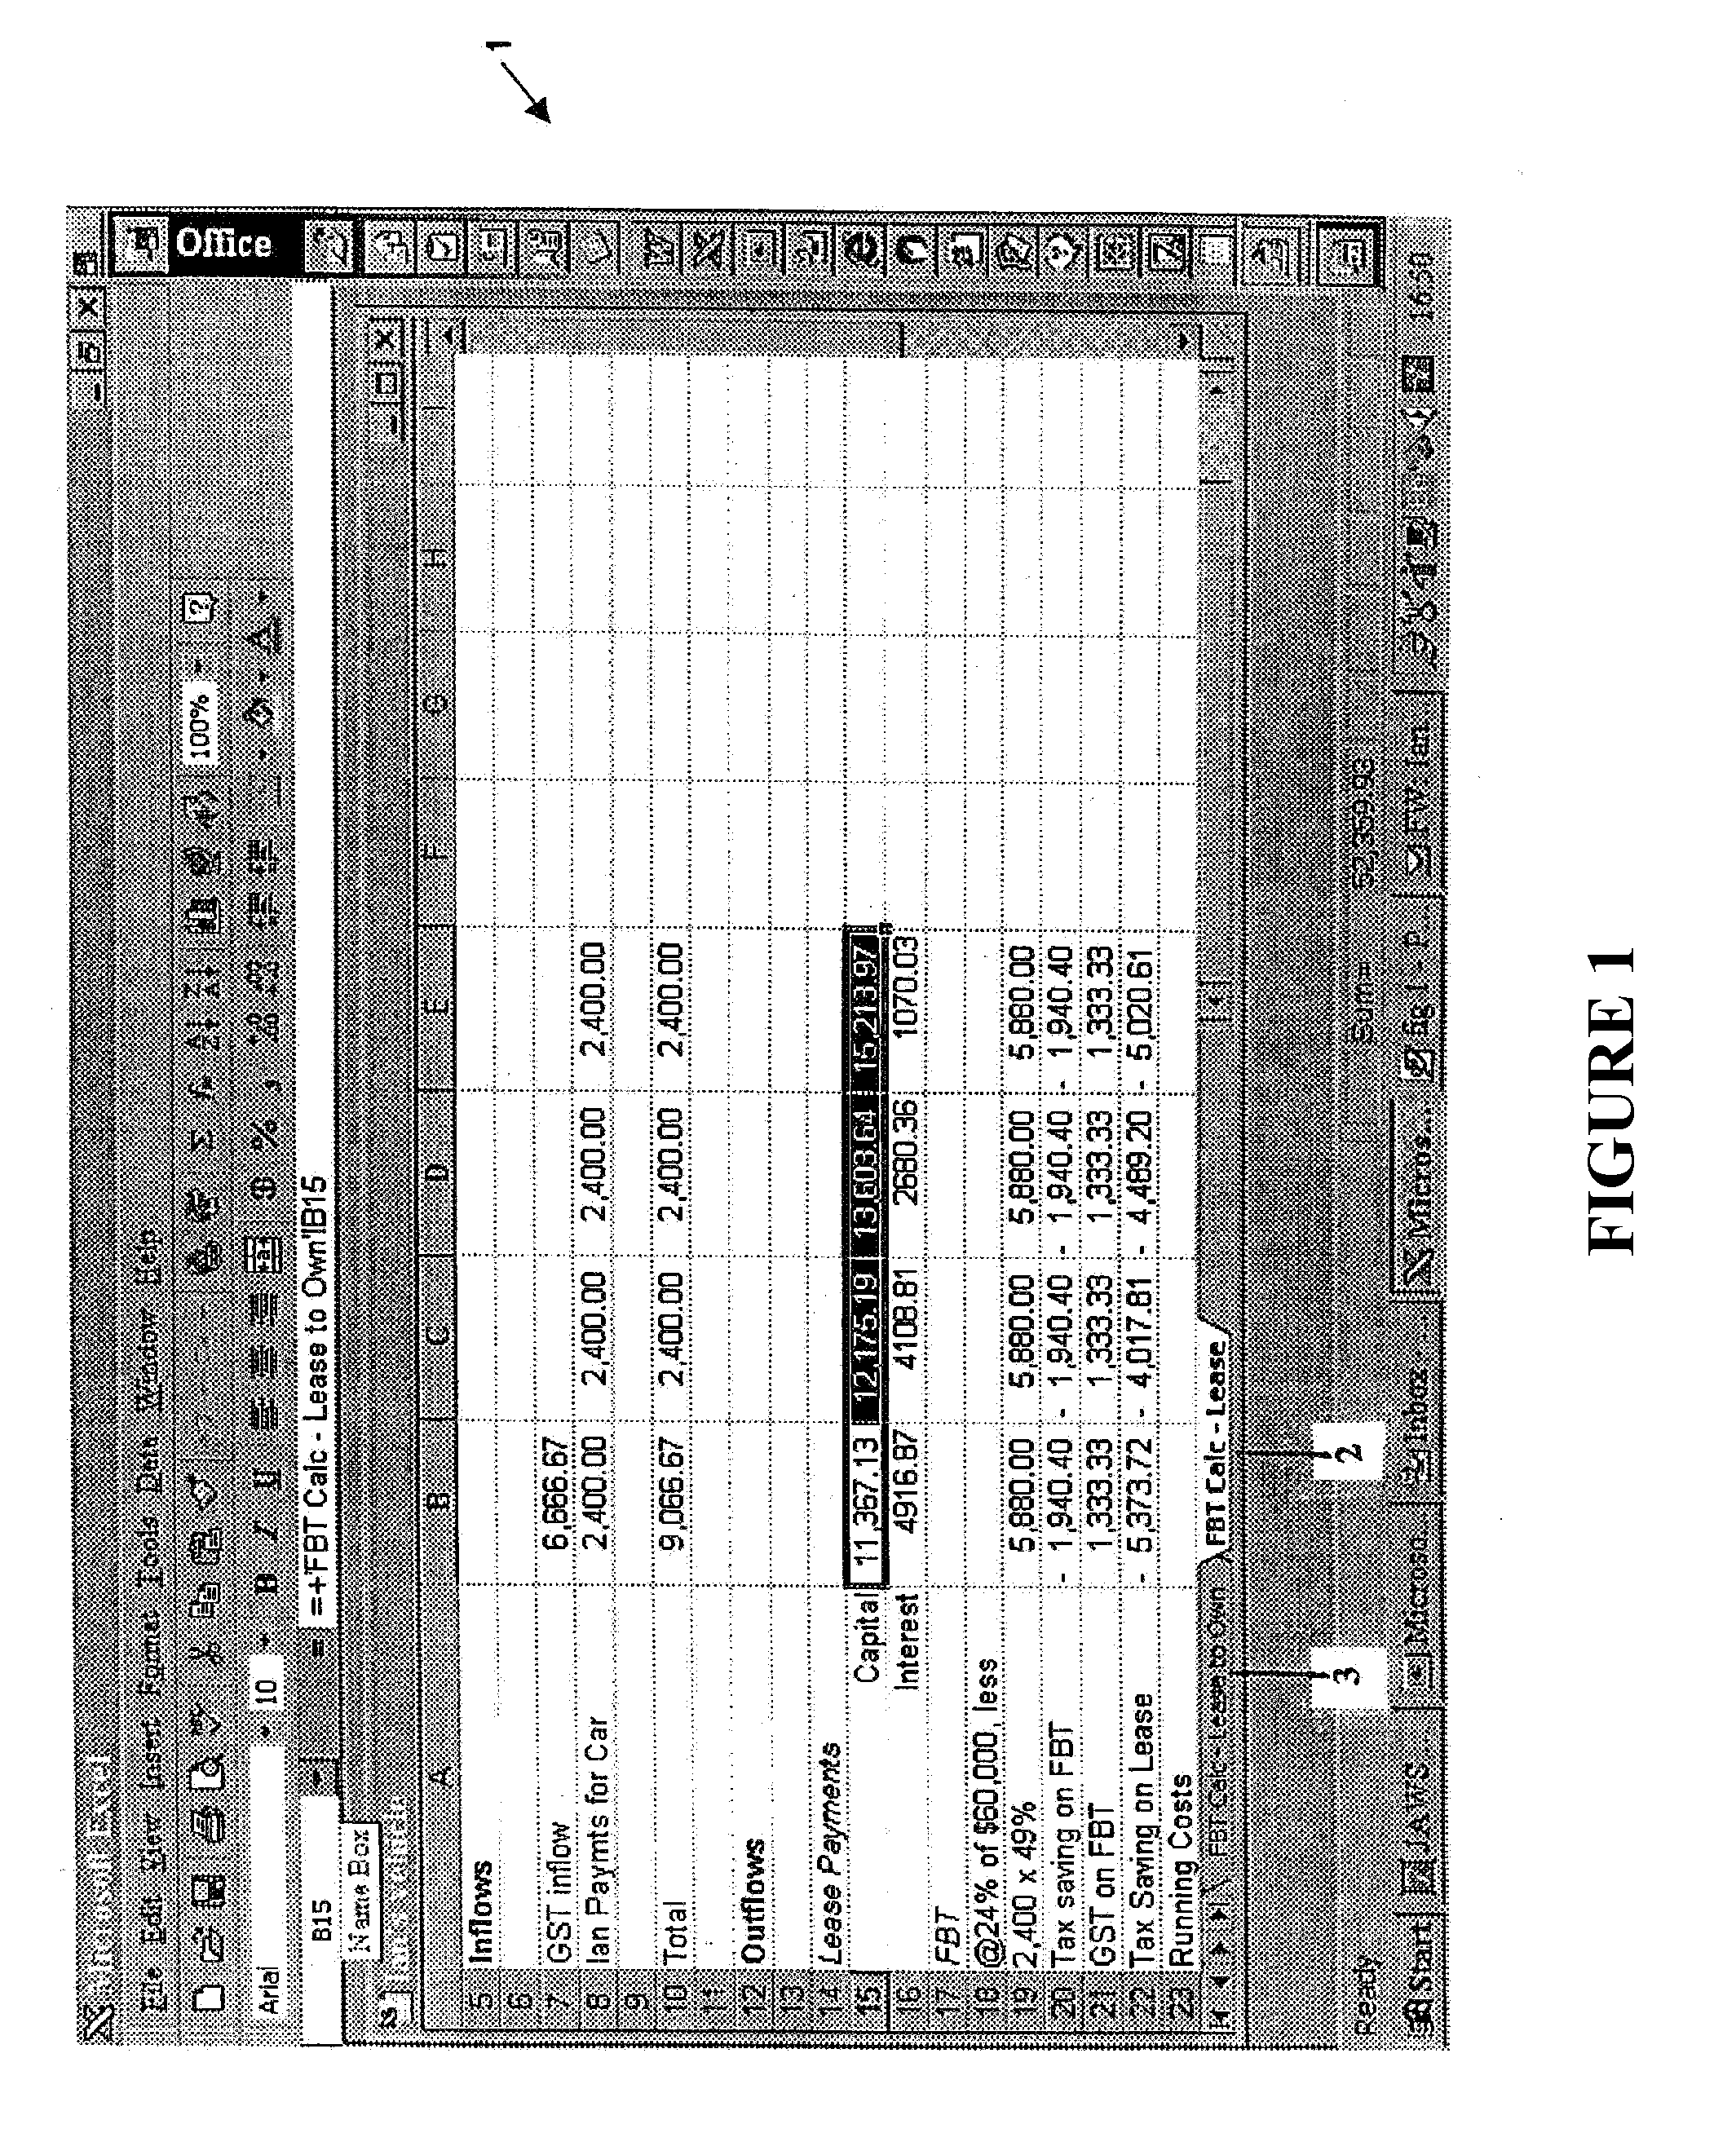 Method and system for assigning screen designation codes